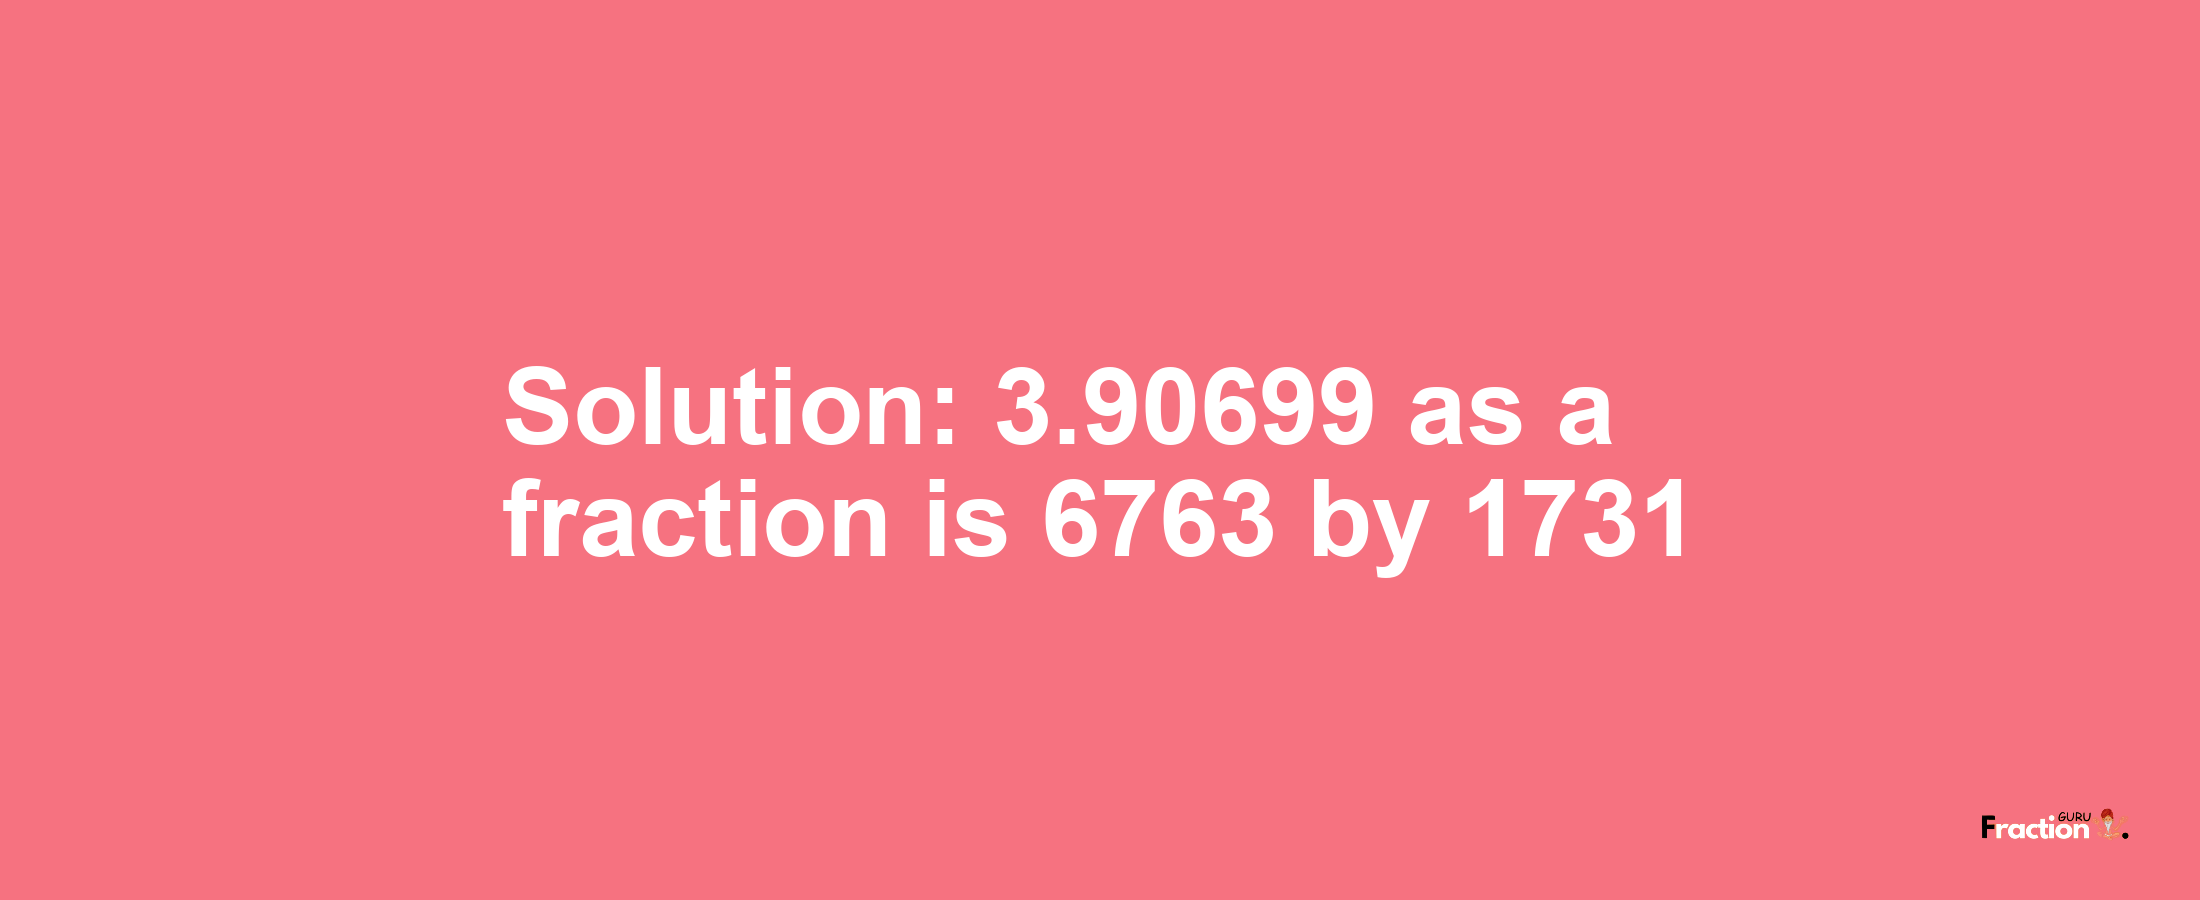 Solution:3.90699 as a fraction is 6763/1731